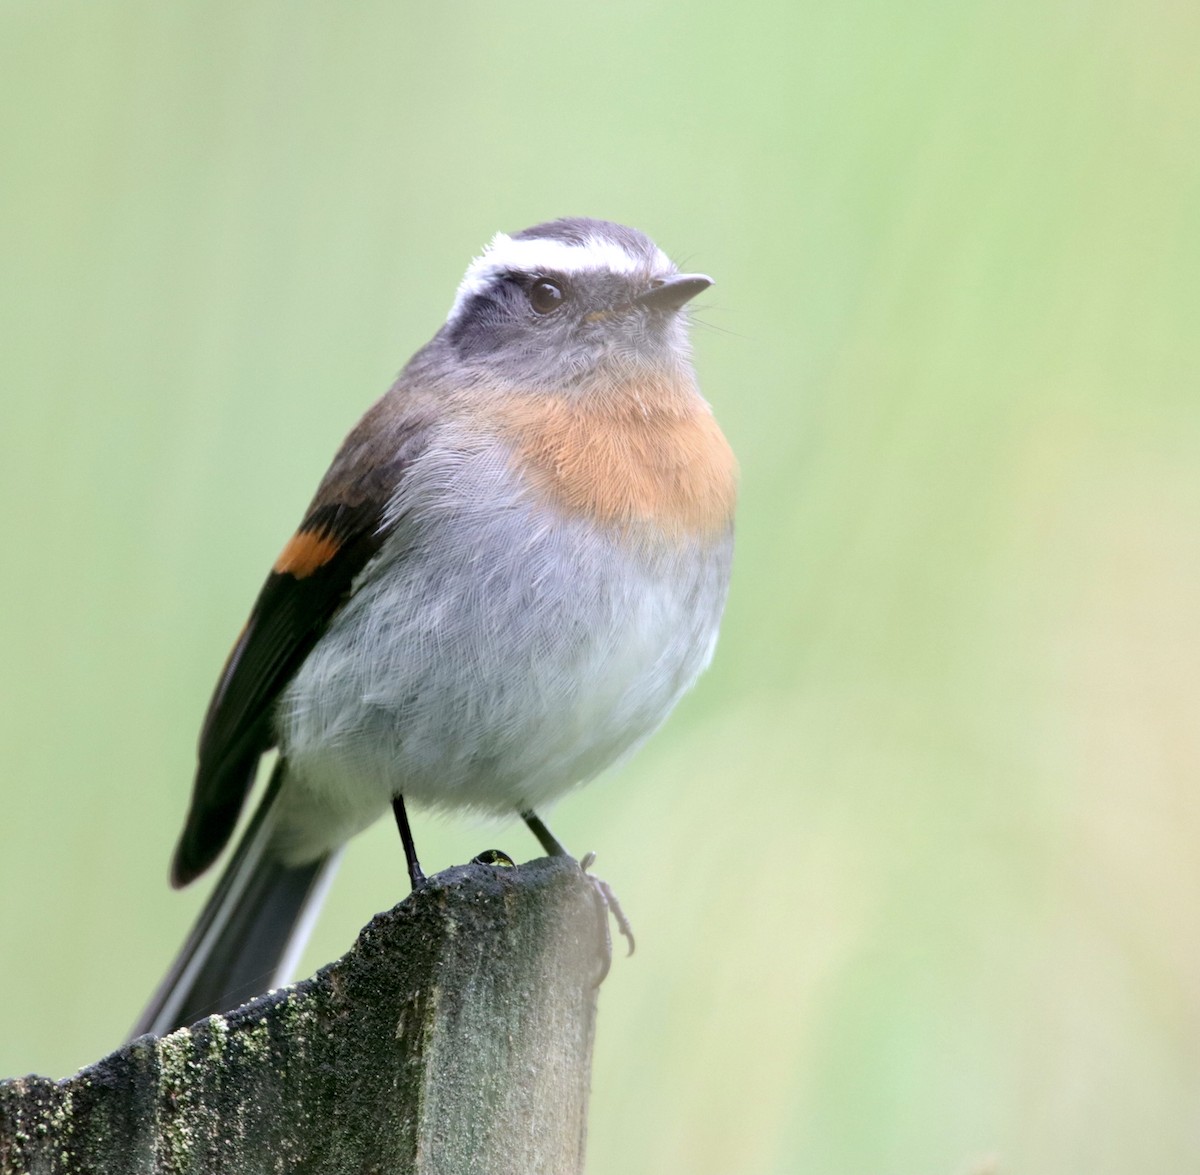 Rufous-breasted Chat-Tyrant - Carolyn Bennett